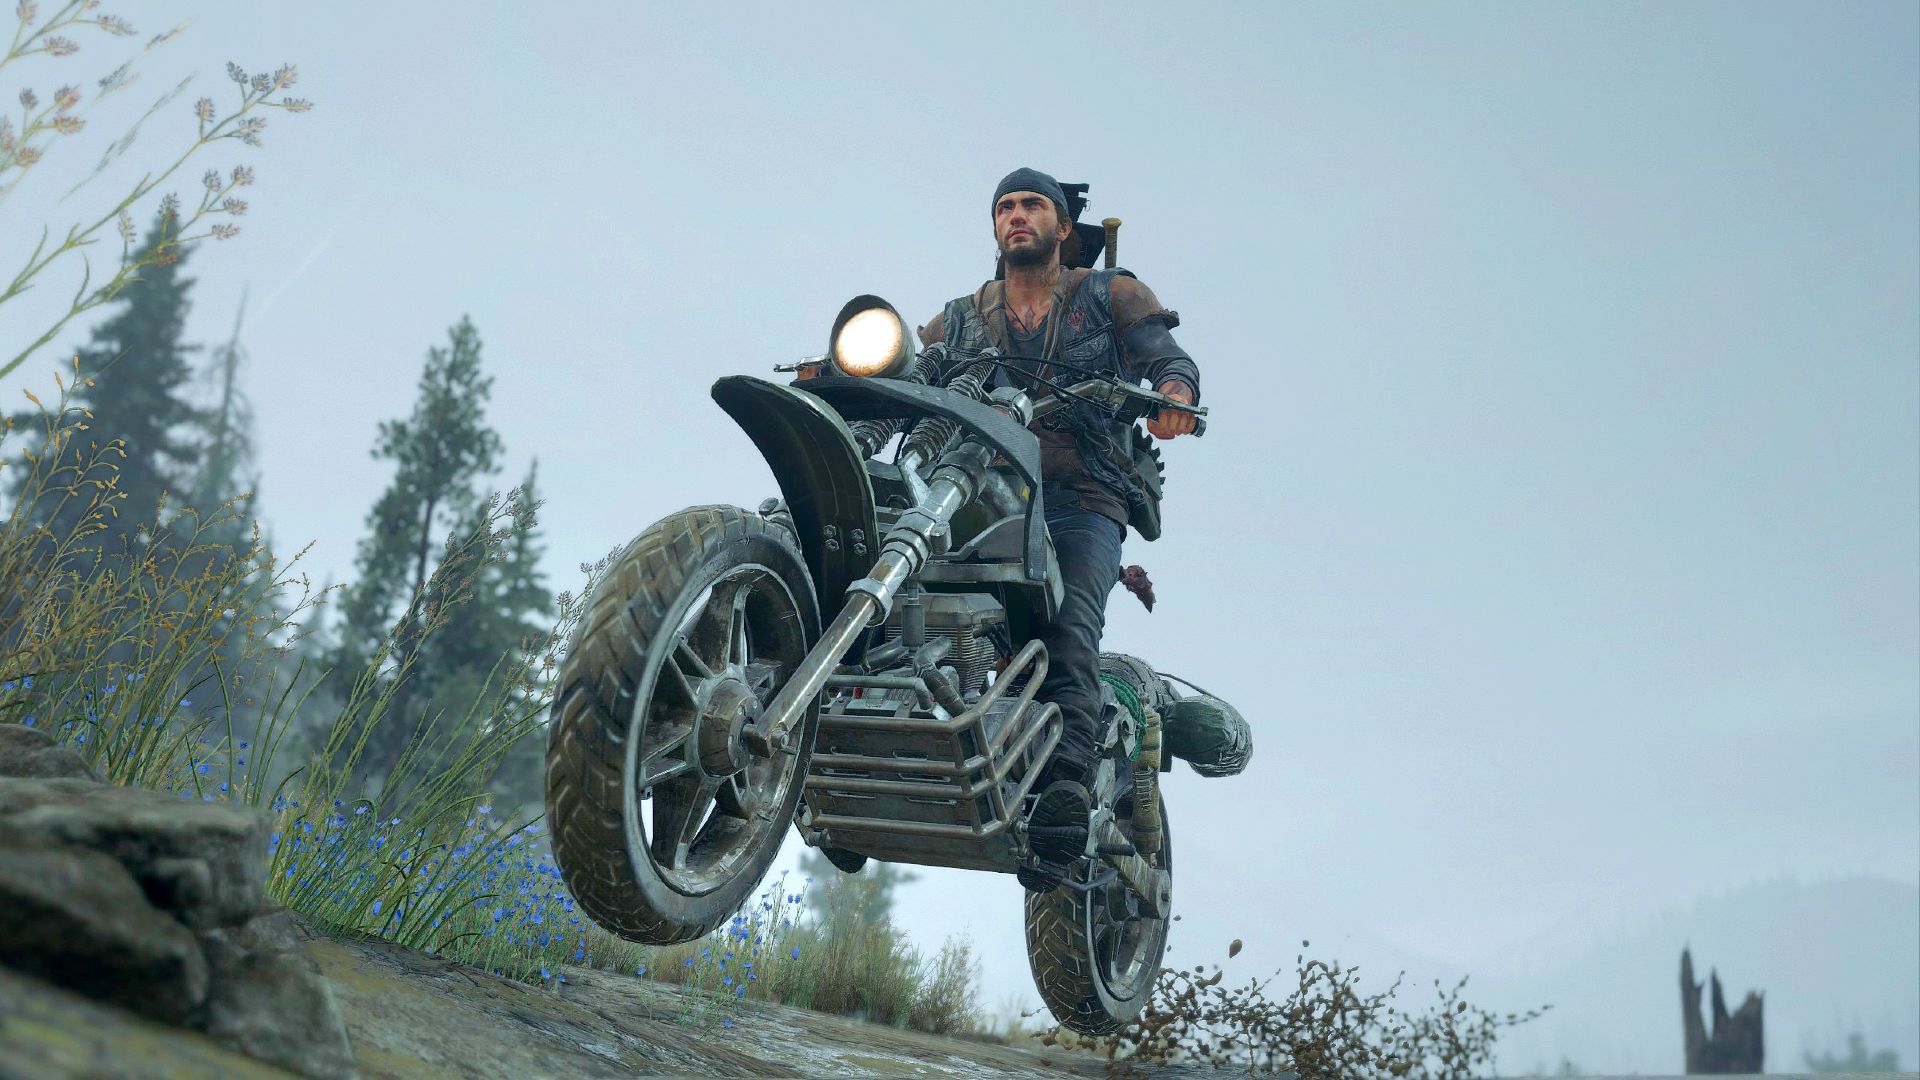 Review] 'Days Gone' on PC is the Best Version of the Divisive Post